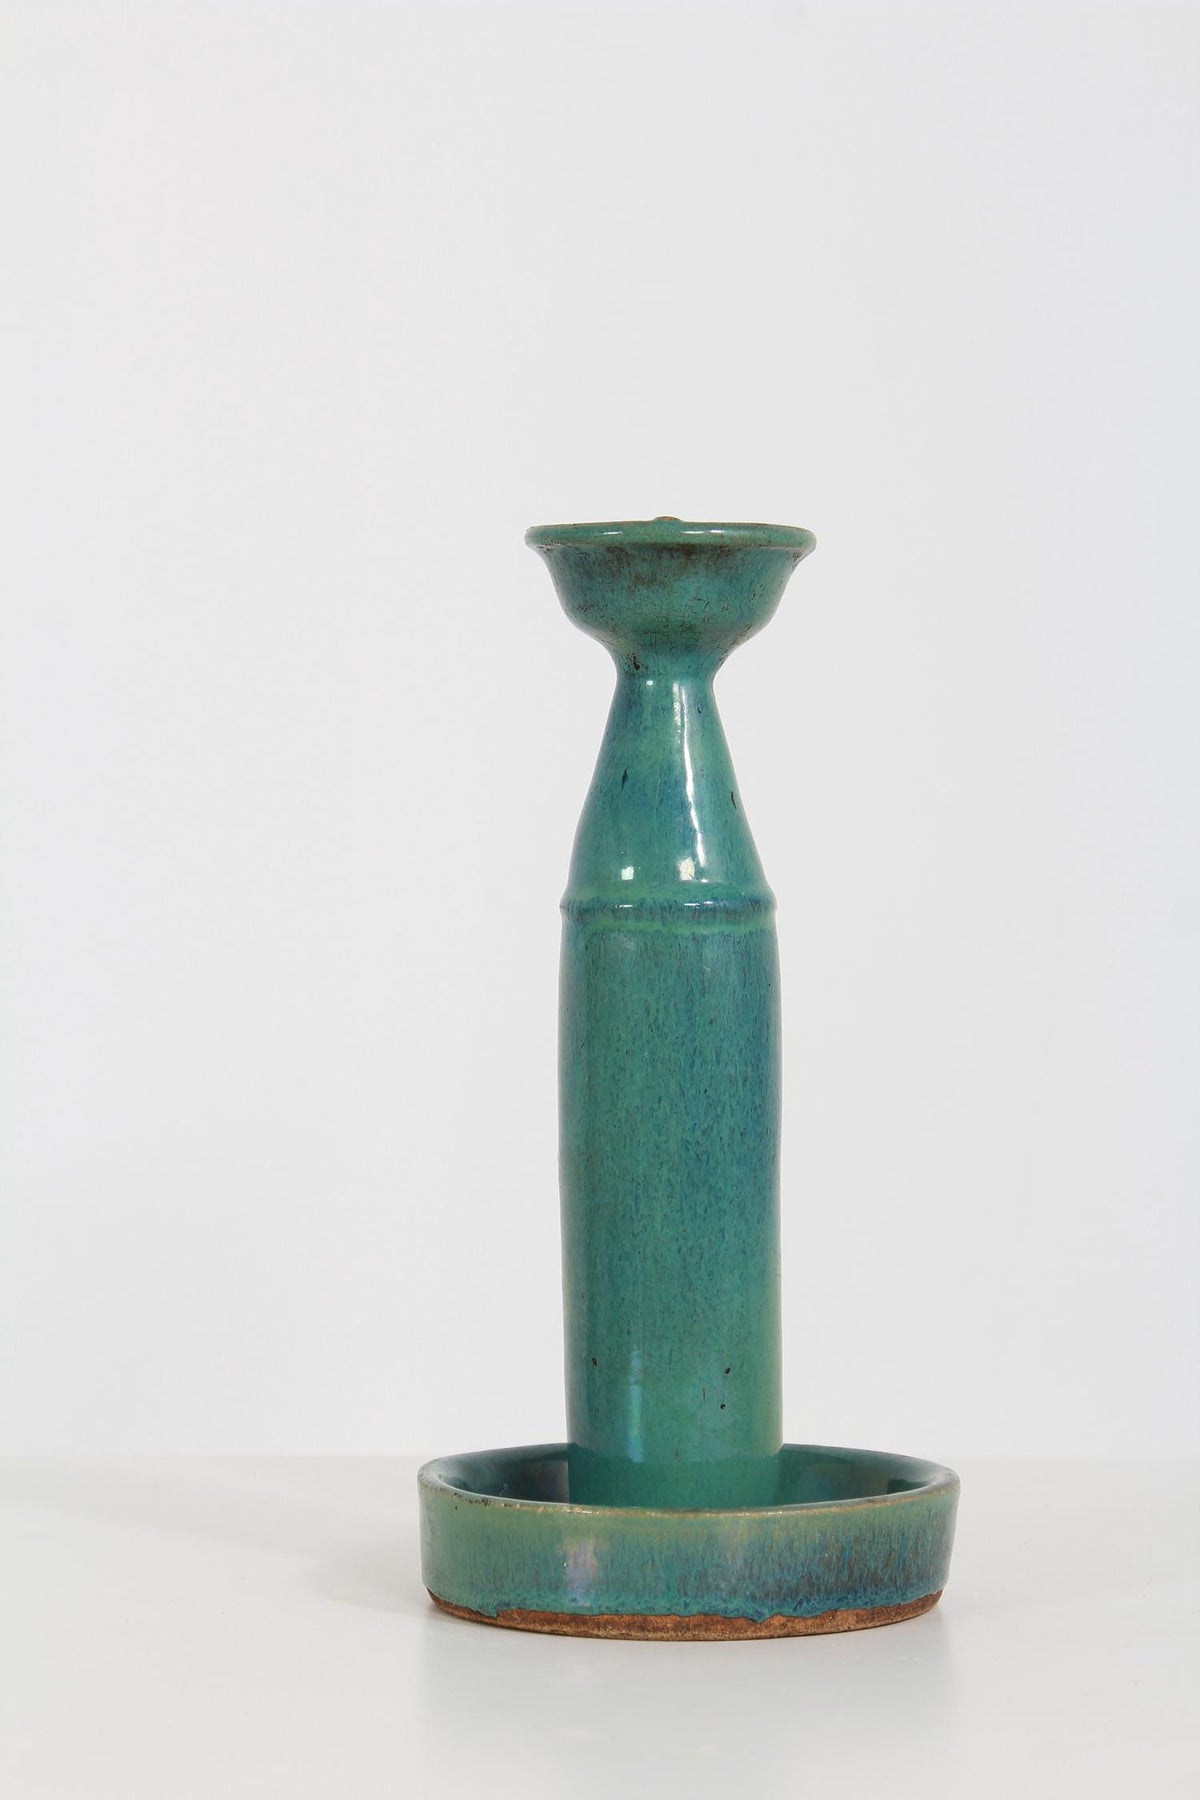 Collection of Three Earthenware Turquoise & Green Candle Holders